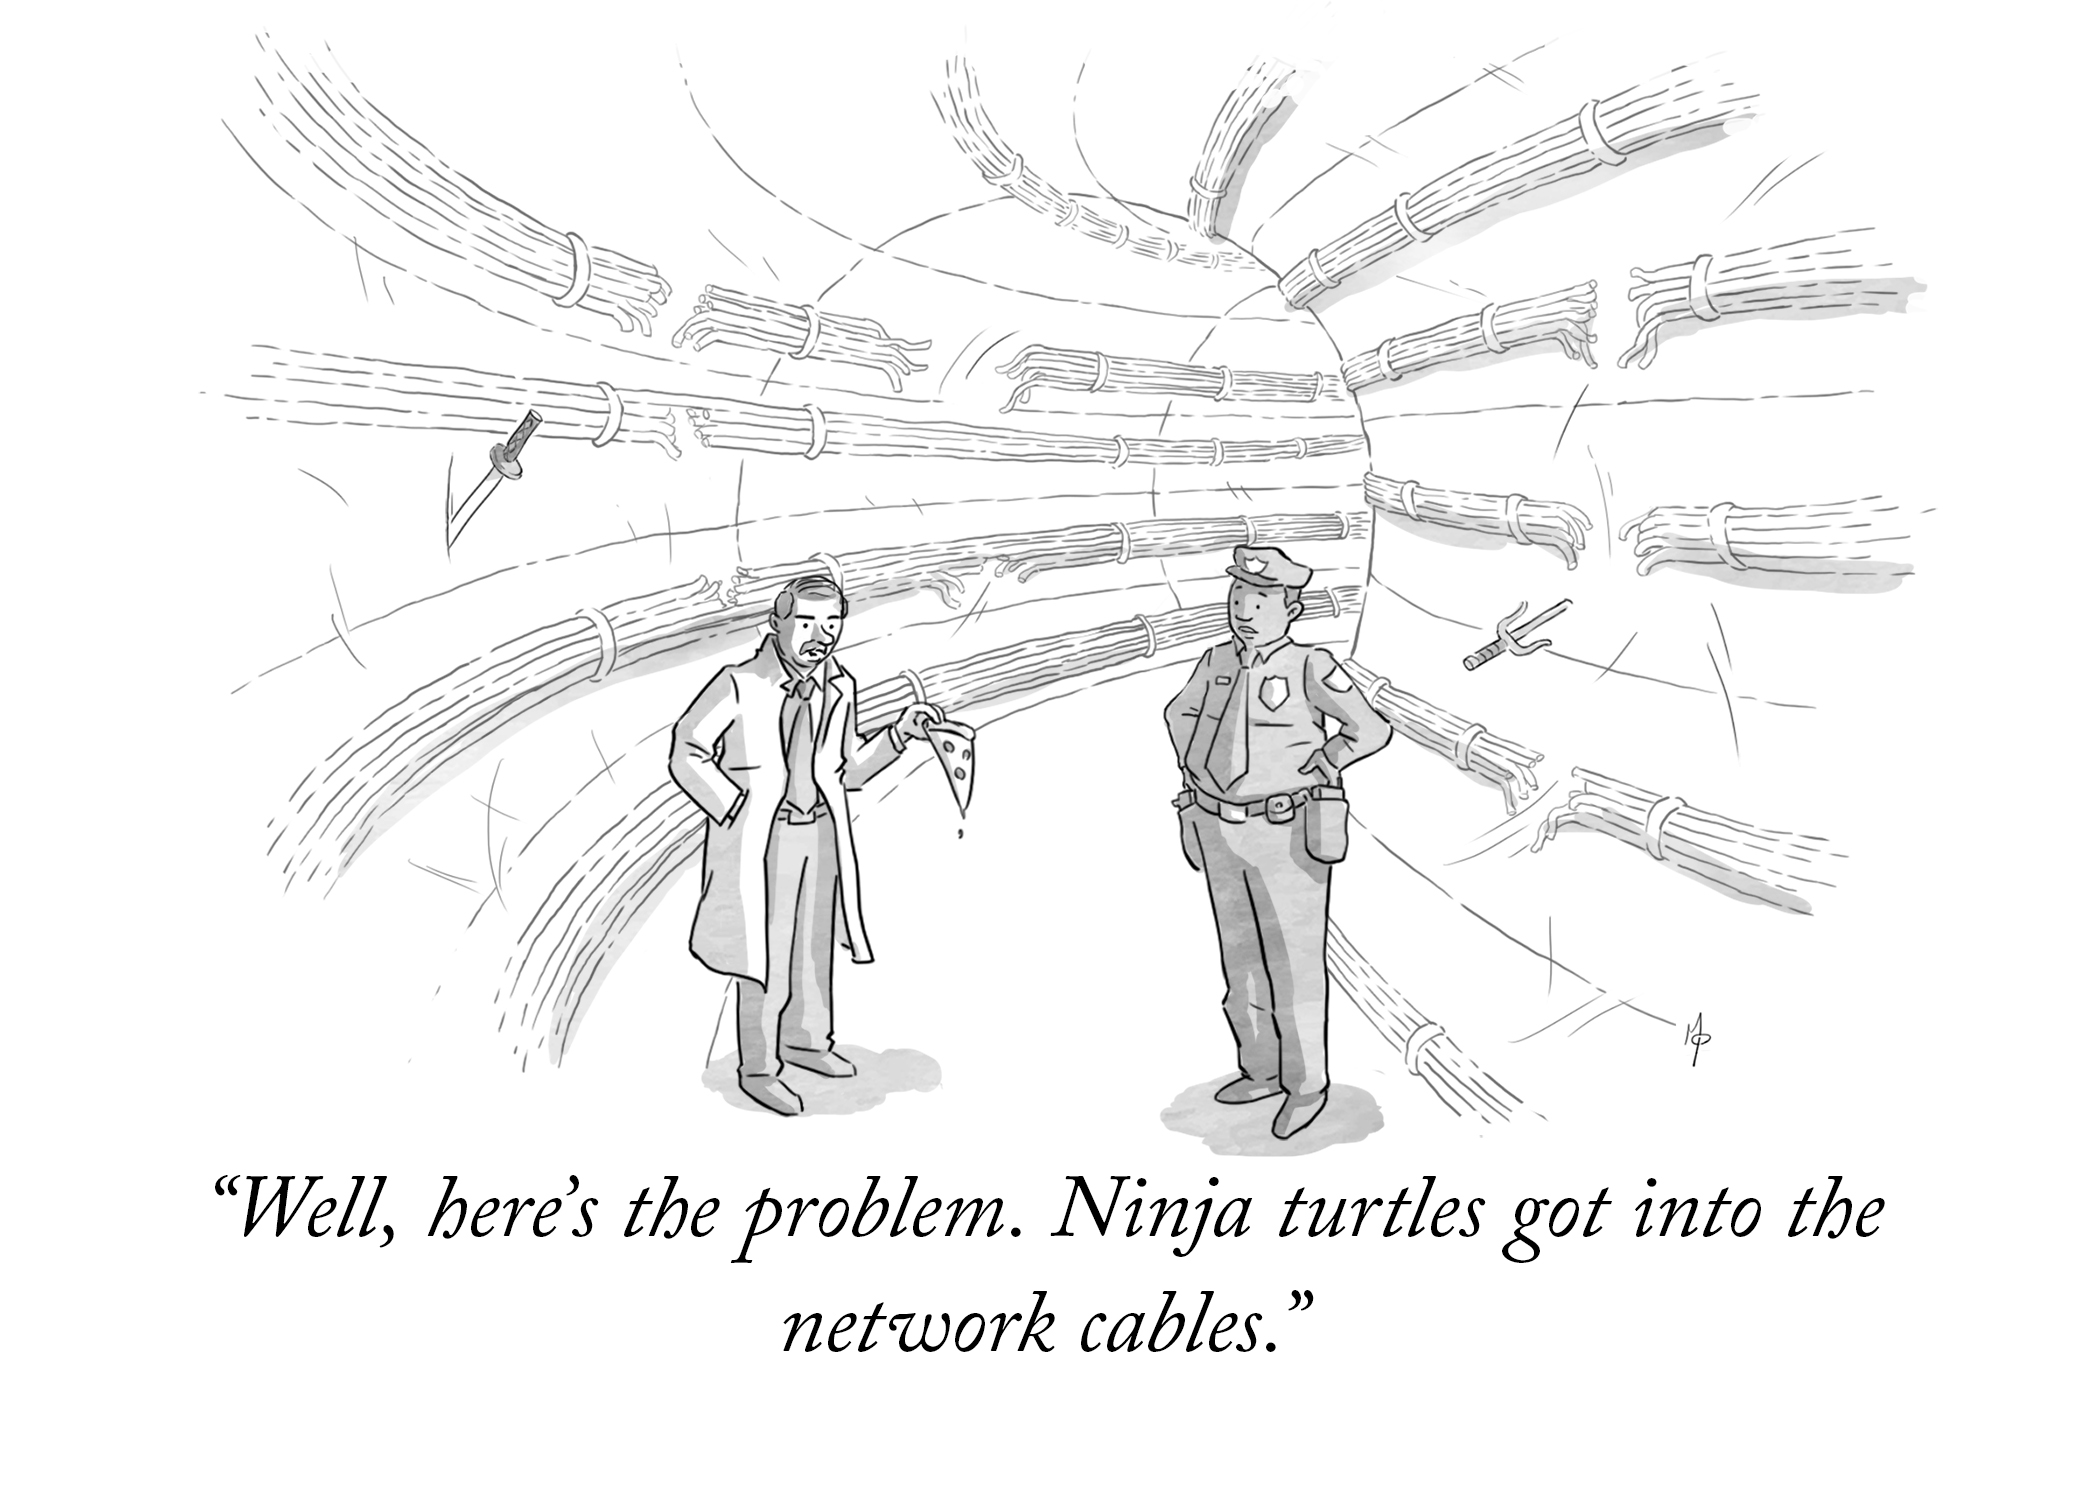 New Yorker style illustration. A police officer and an investigator are speaking in a tunnel. The investigator is holding a slice of pizza. The caption reads: Well, heres the problem. Ninja turtles got into the network cables.